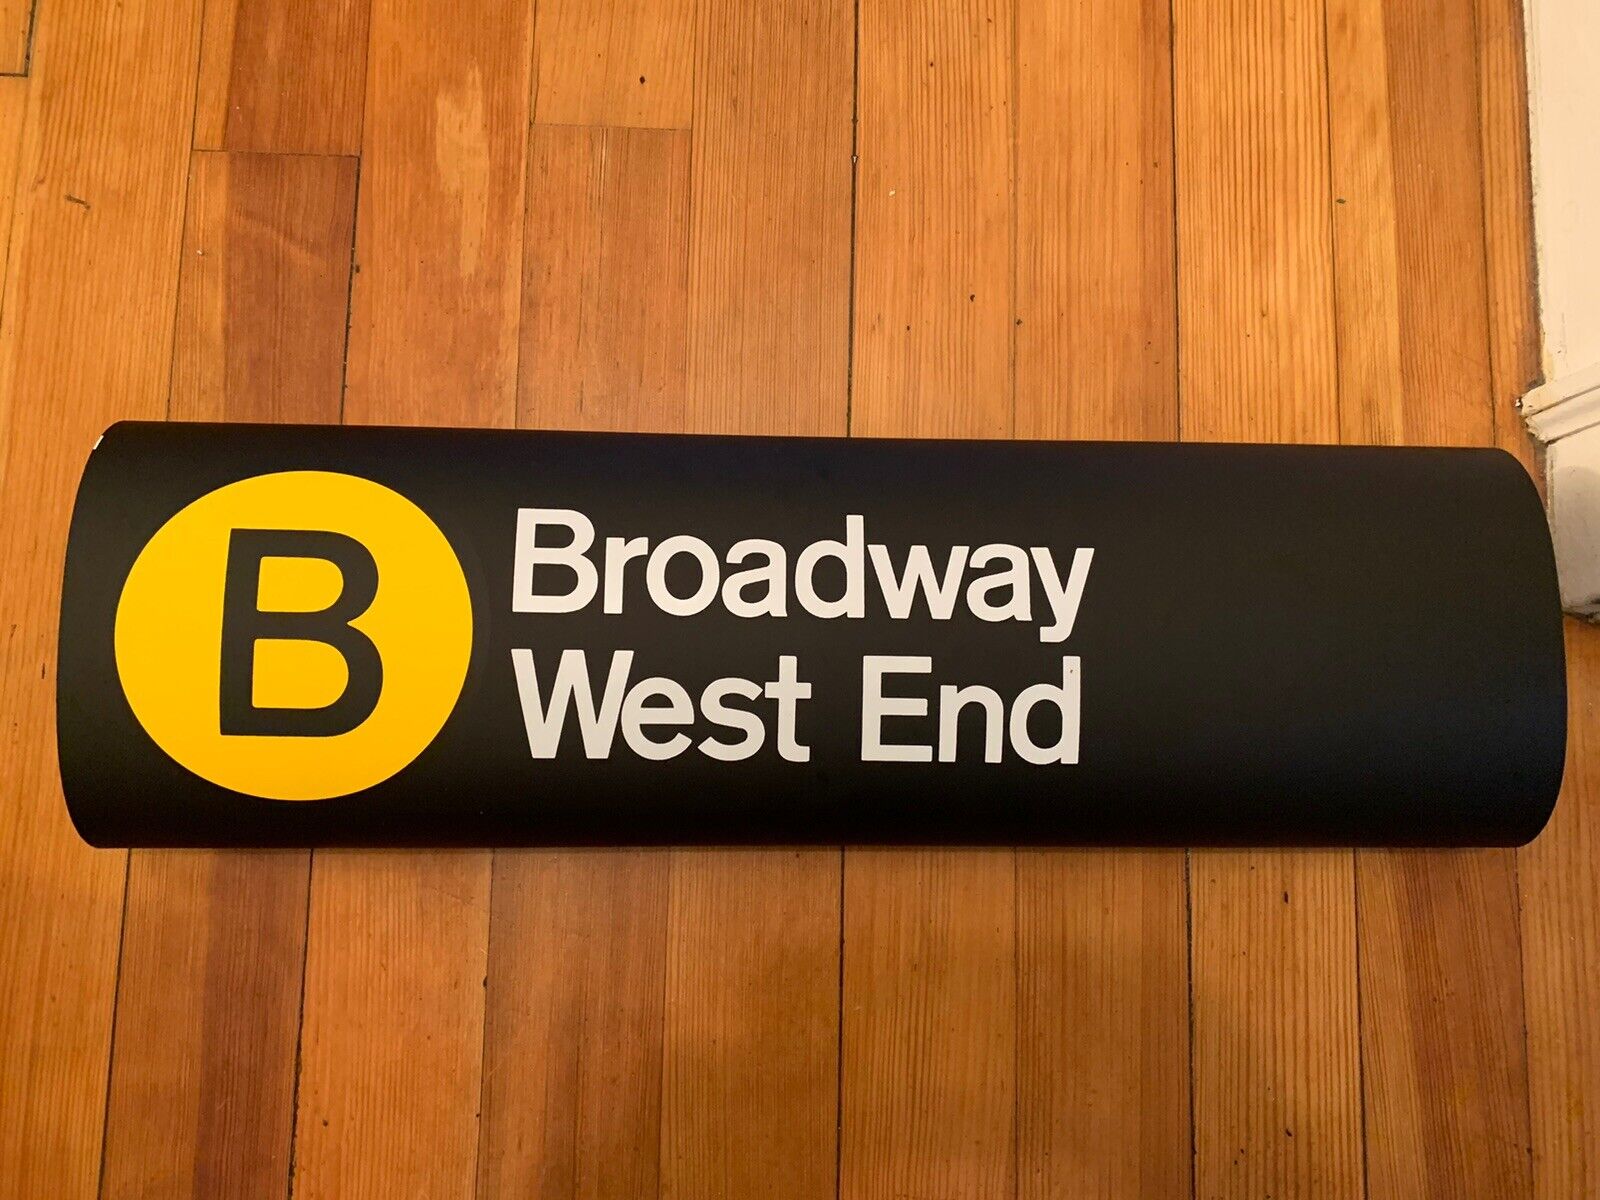 NY NYC SUBWAY ROLL SIGN B TRAIN BROADWAY THEATRE SHOWS PLAYS WEST END MANHATTAN